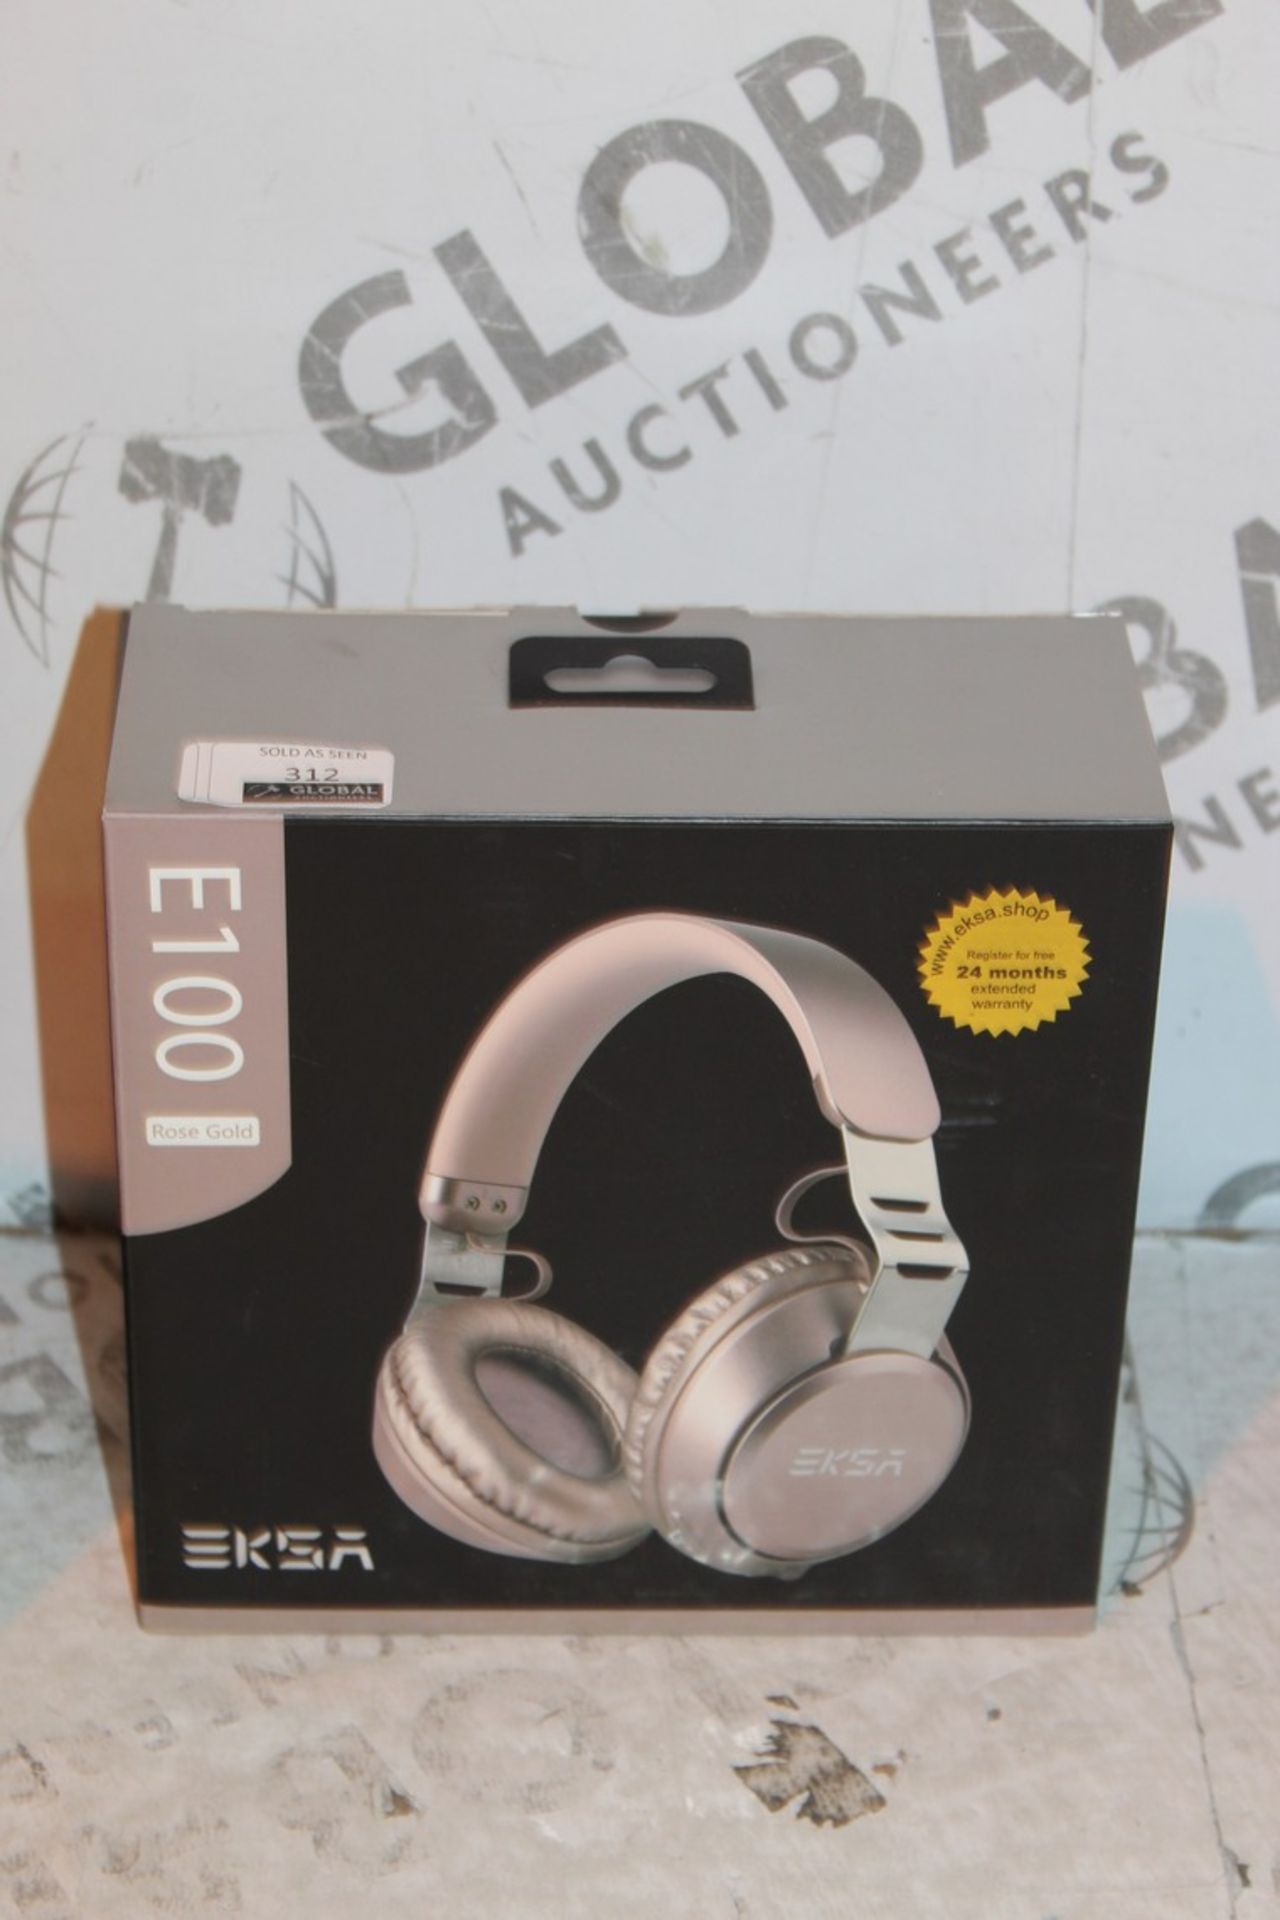 Boxed Pair E100 Rose Gold Wireless Headphones RRP £45 (Pictures Are For Illustration Purposes